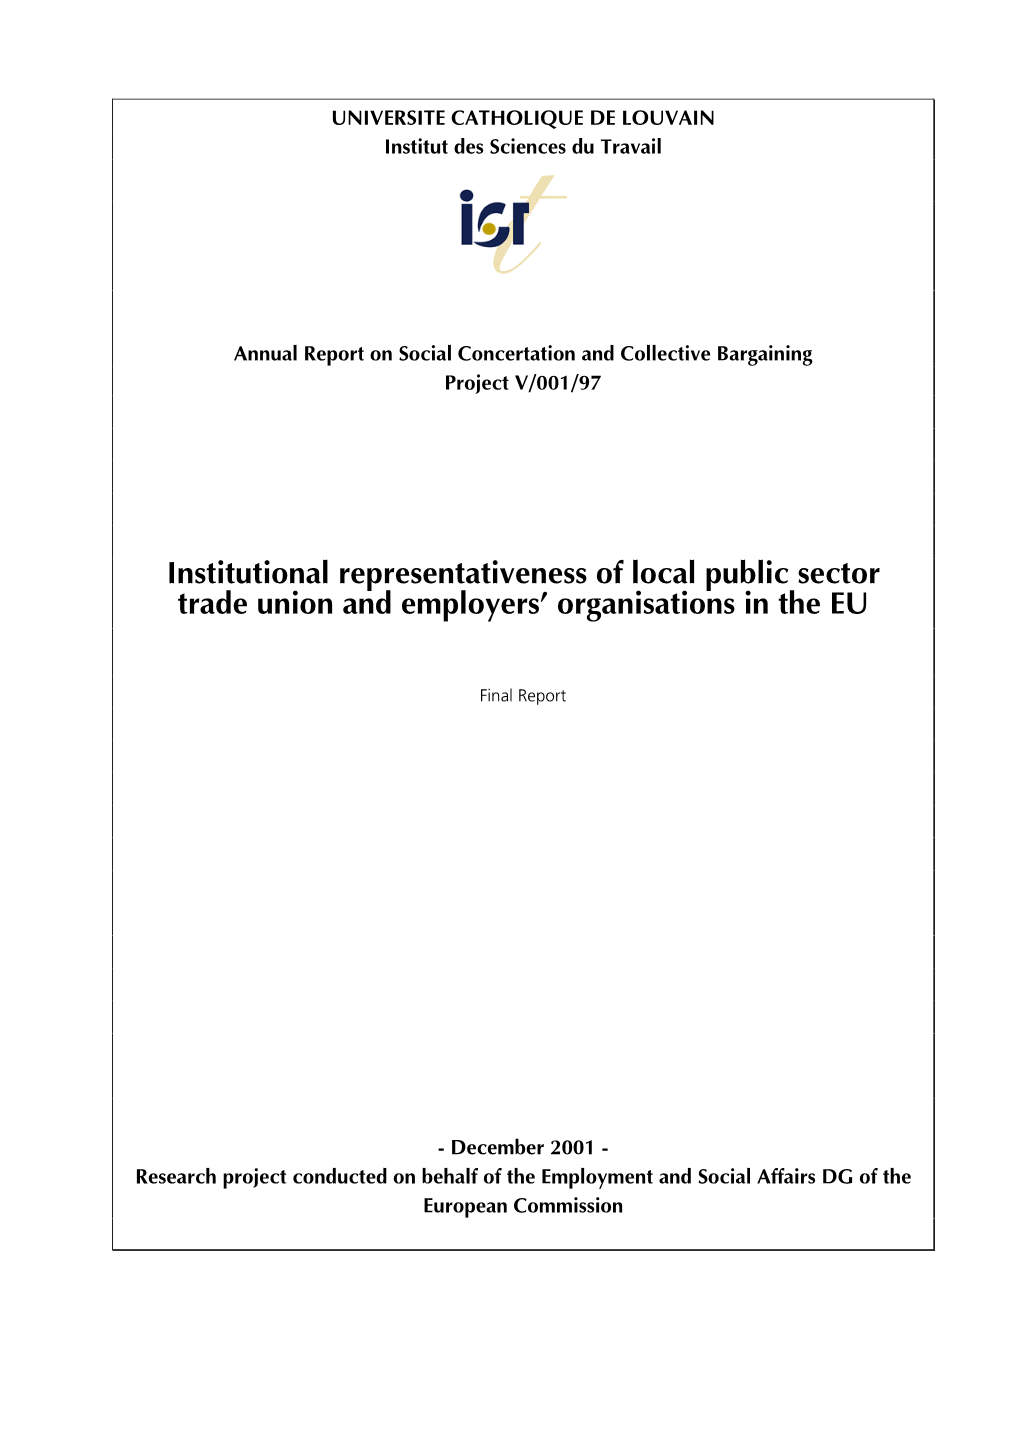 Institutional Representativeness of Local Public Sector Trade Union and Employers' Organisations in the EU